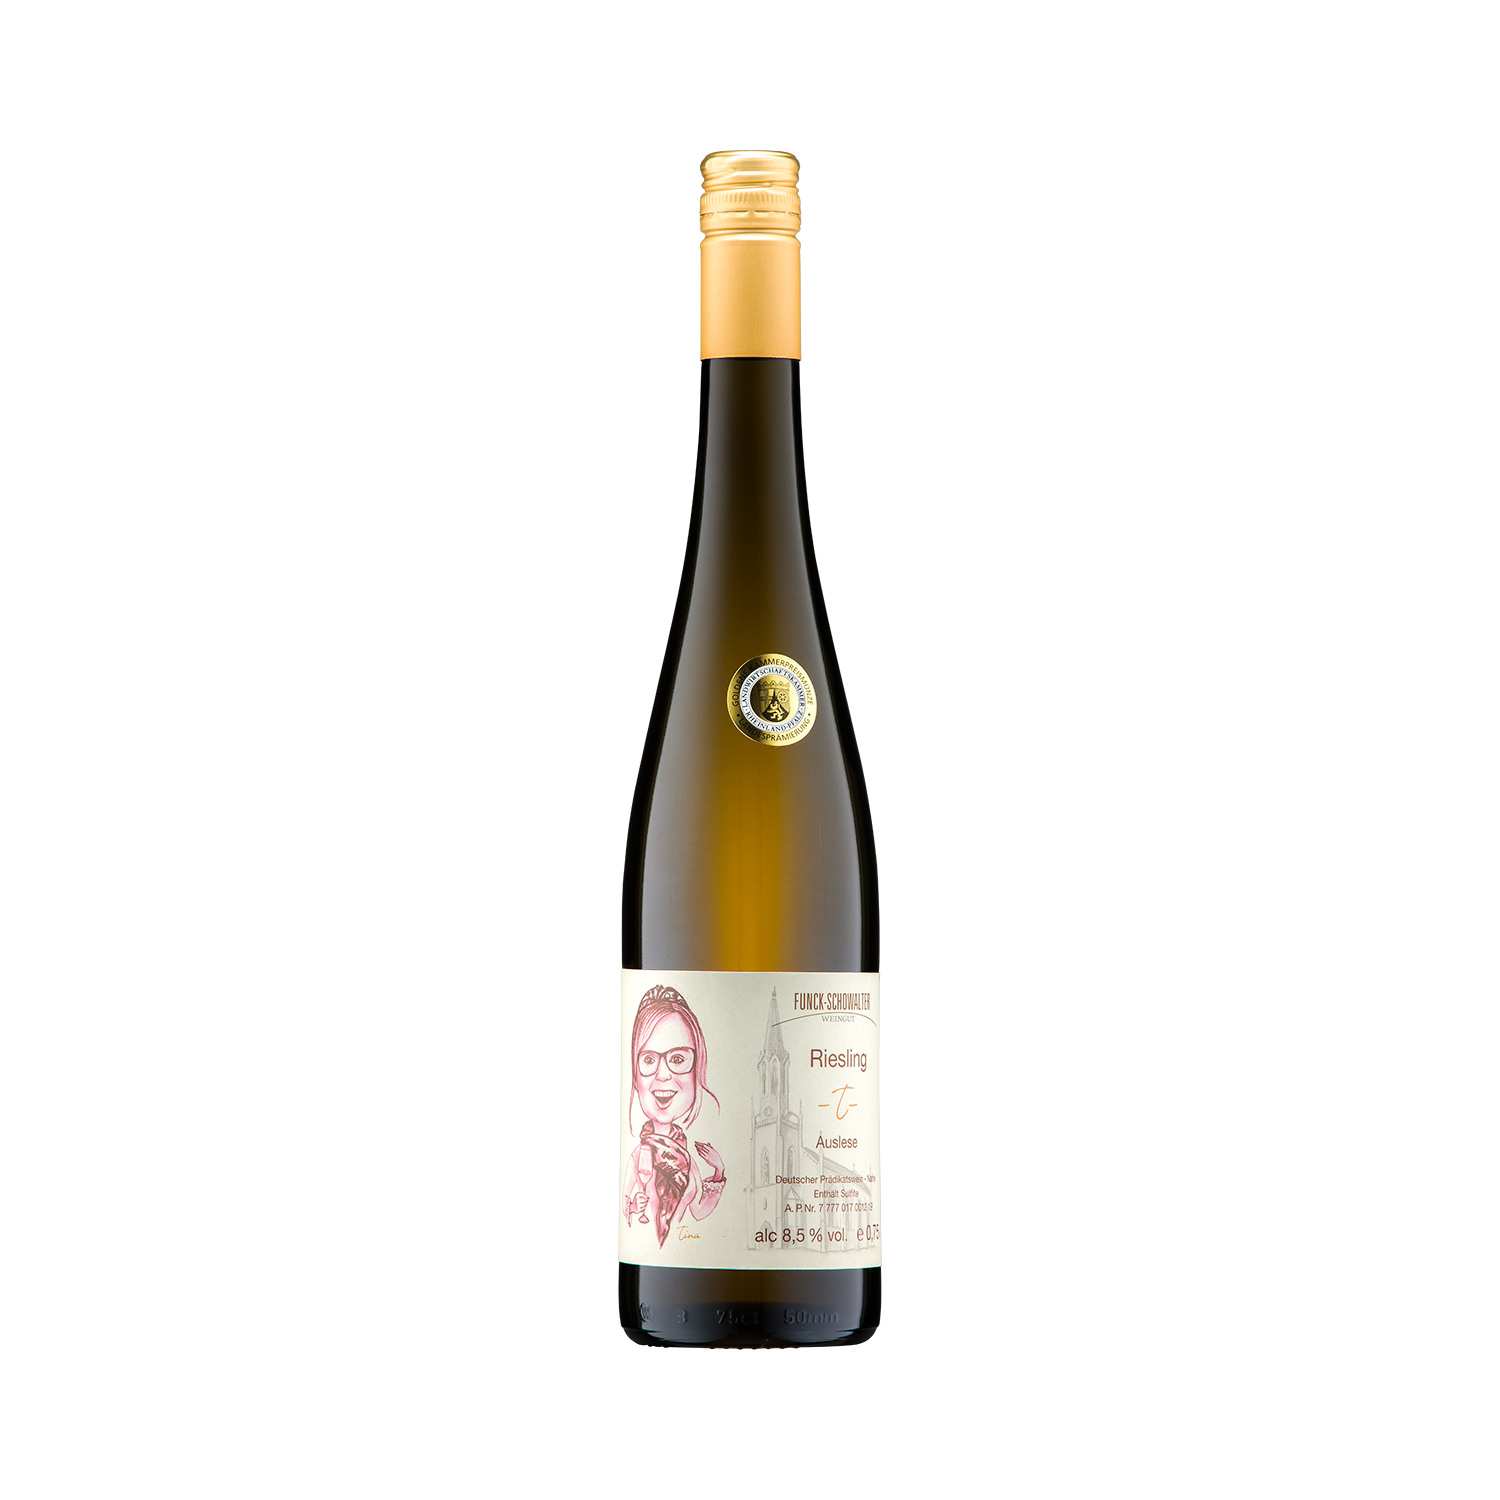 2018 RIESLING AUSLESE “T” 